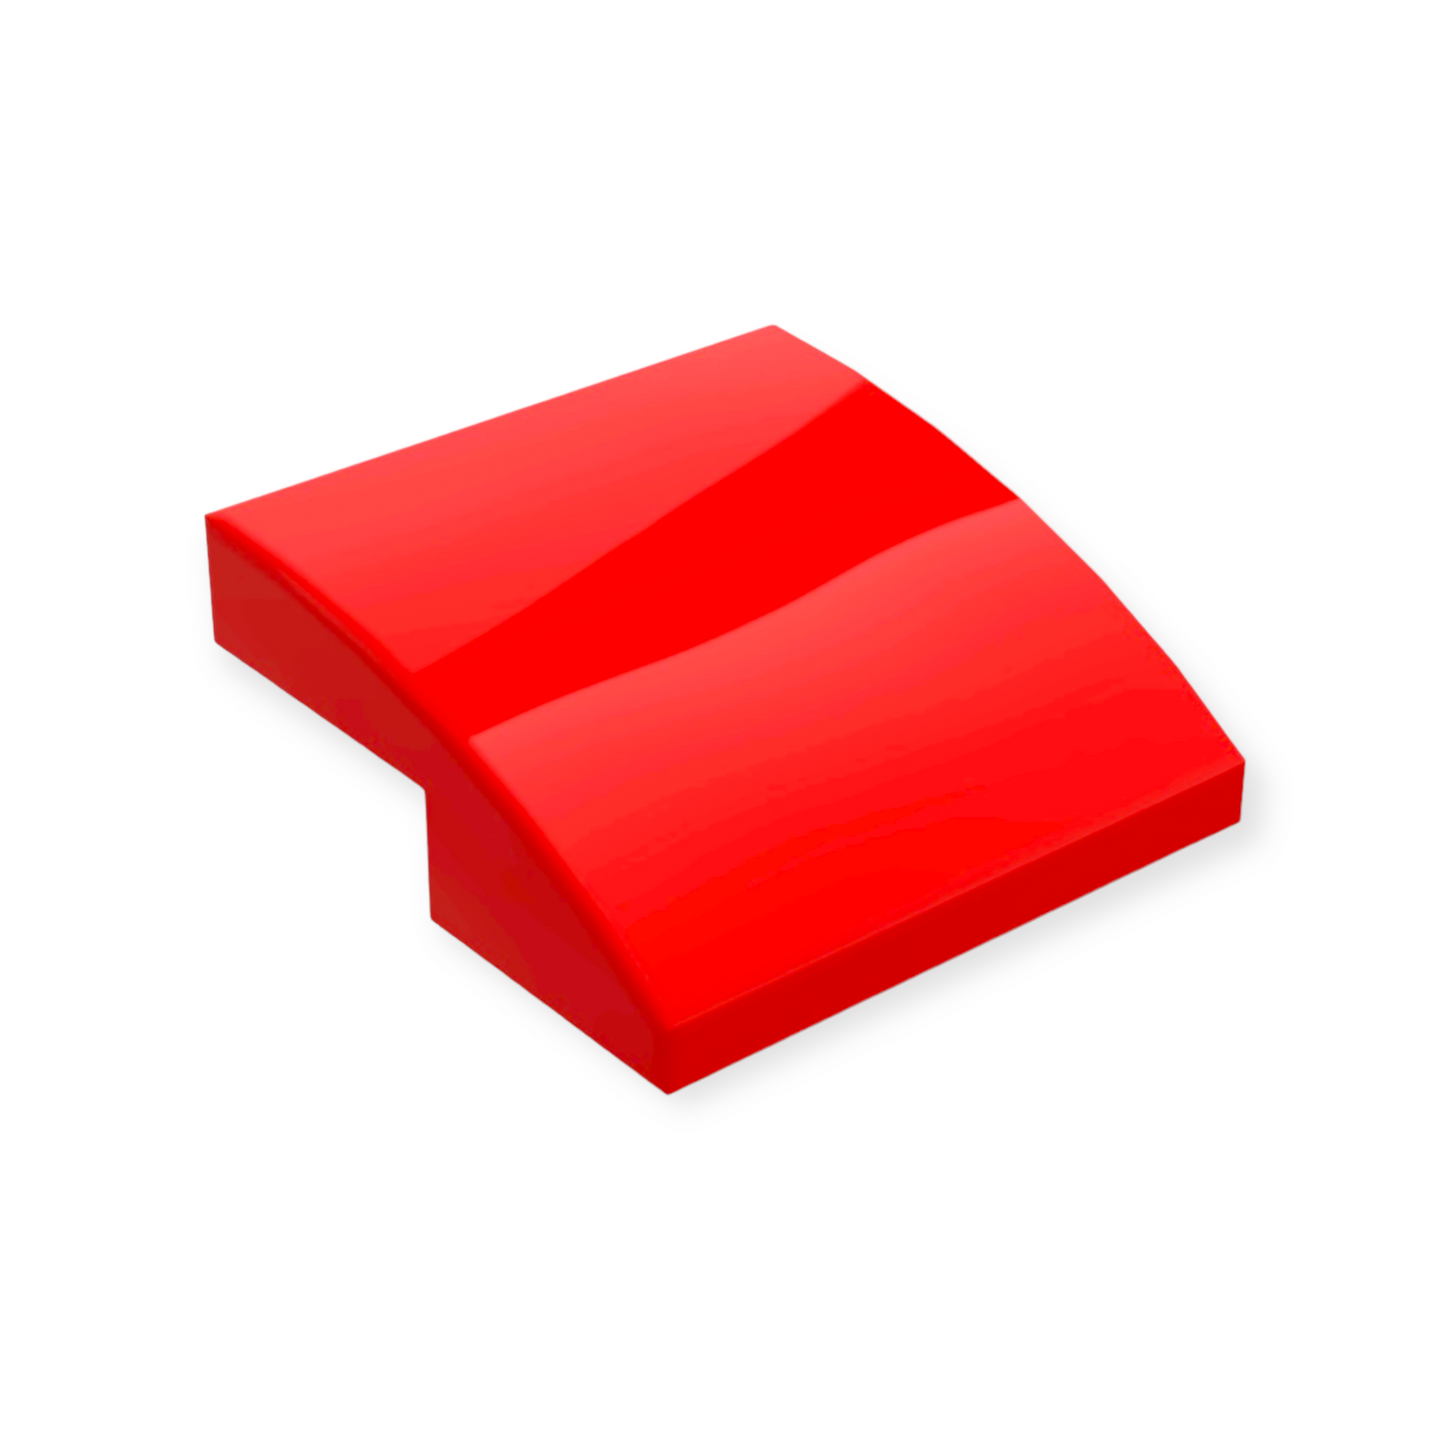 LEGO Slope Curved 2x2x2/3 - Red